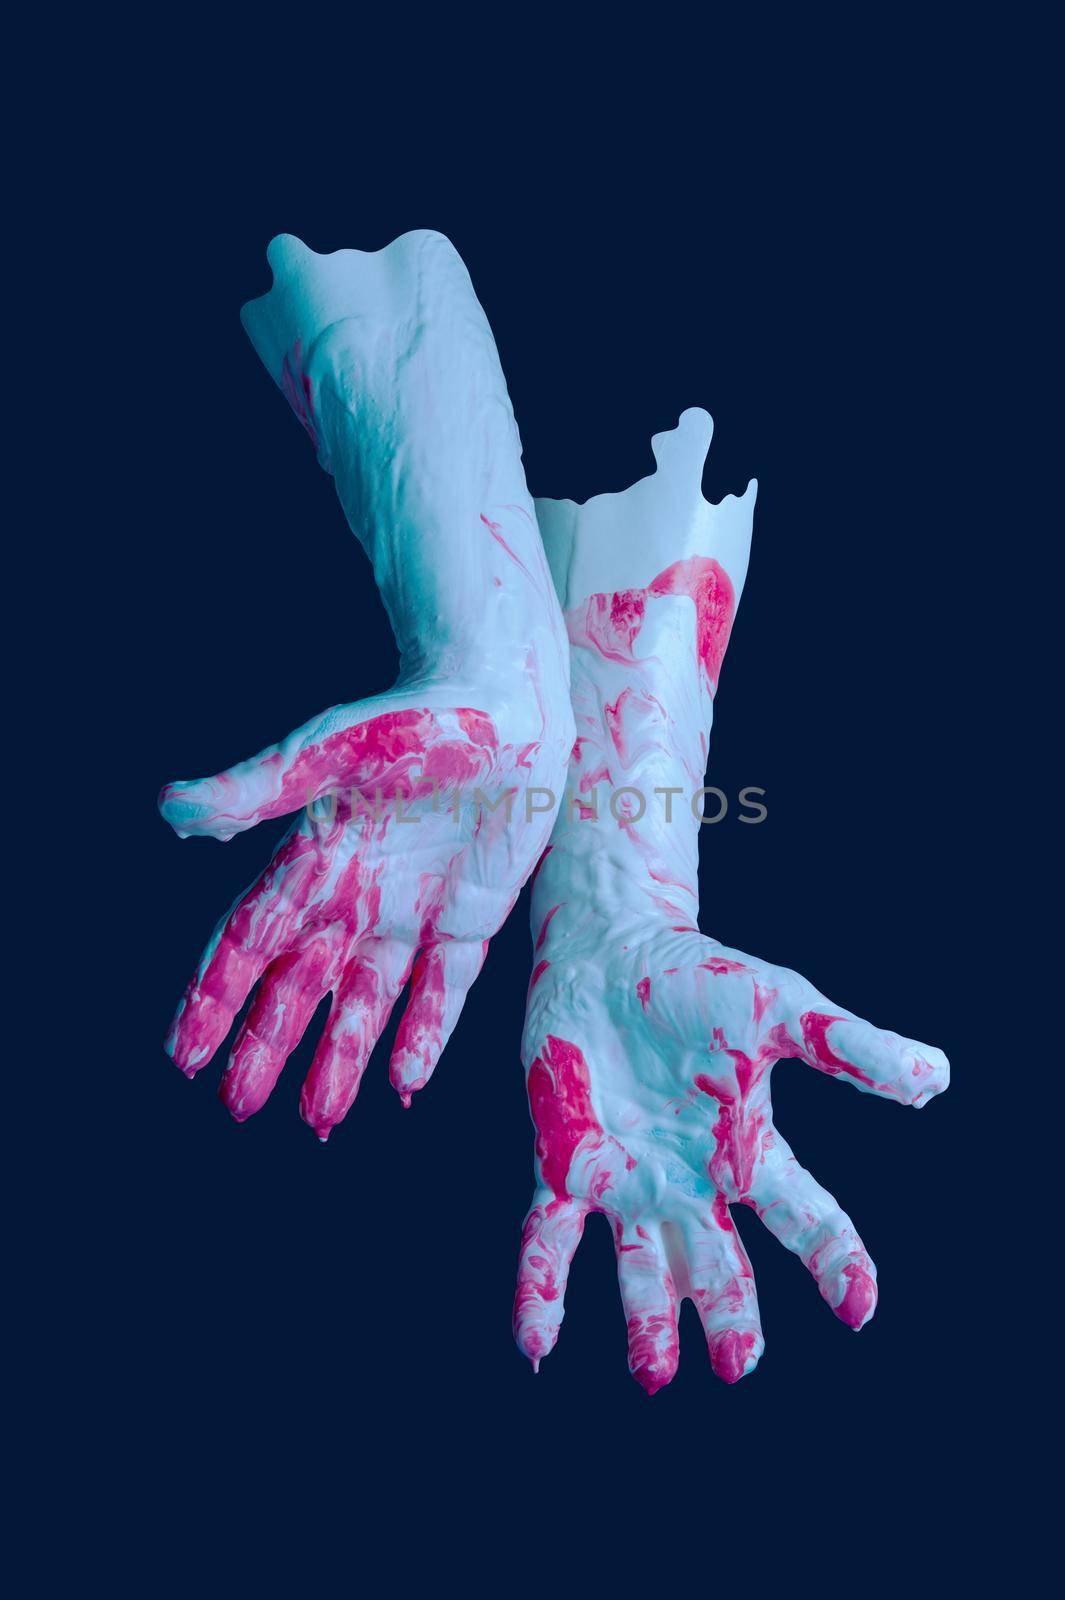 Human palms dipped in color paint. Painted hands. Liquid drips off fingers. Gesture. Contemporary art collage. Abstract surreal pop art style. Modern concept image. Funky minimalism. Zine culture.